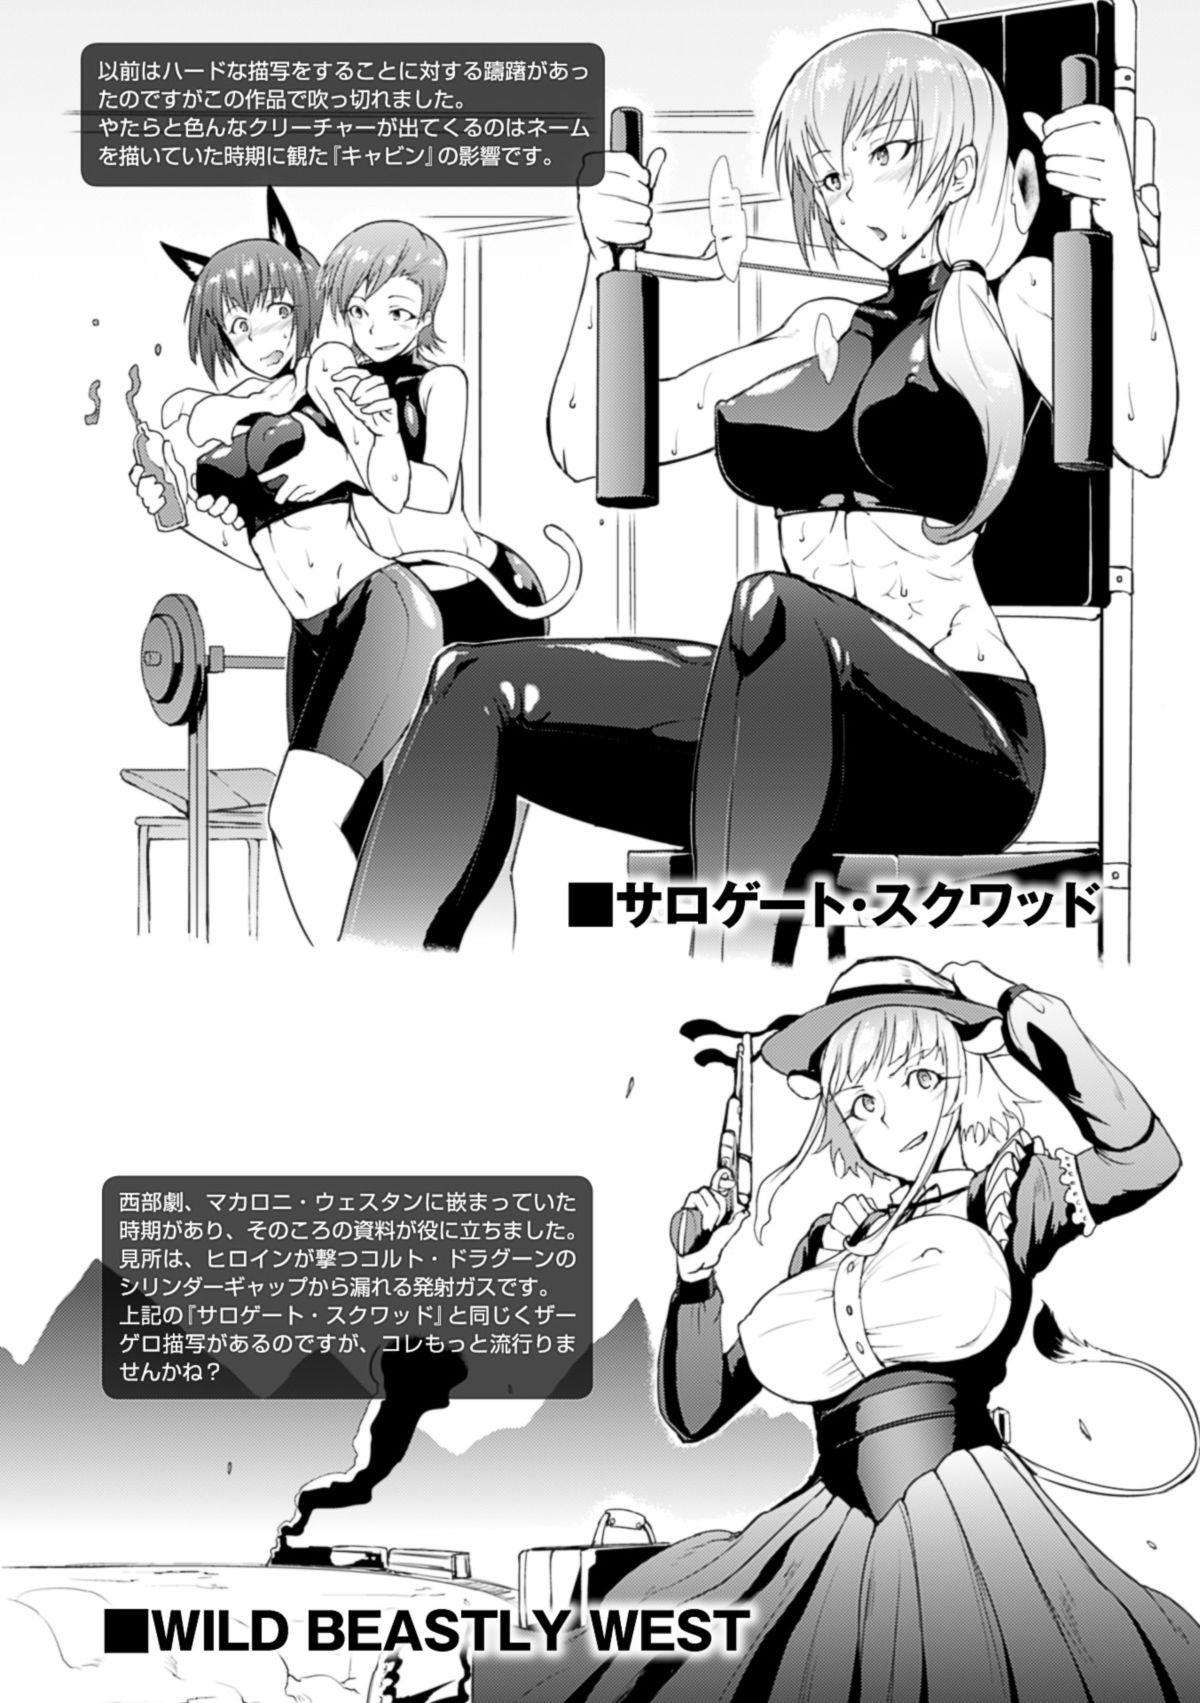 Dropout Page 181 Of 192 hentai manga, Dropout Page 181 Of 192 hentai comic,...